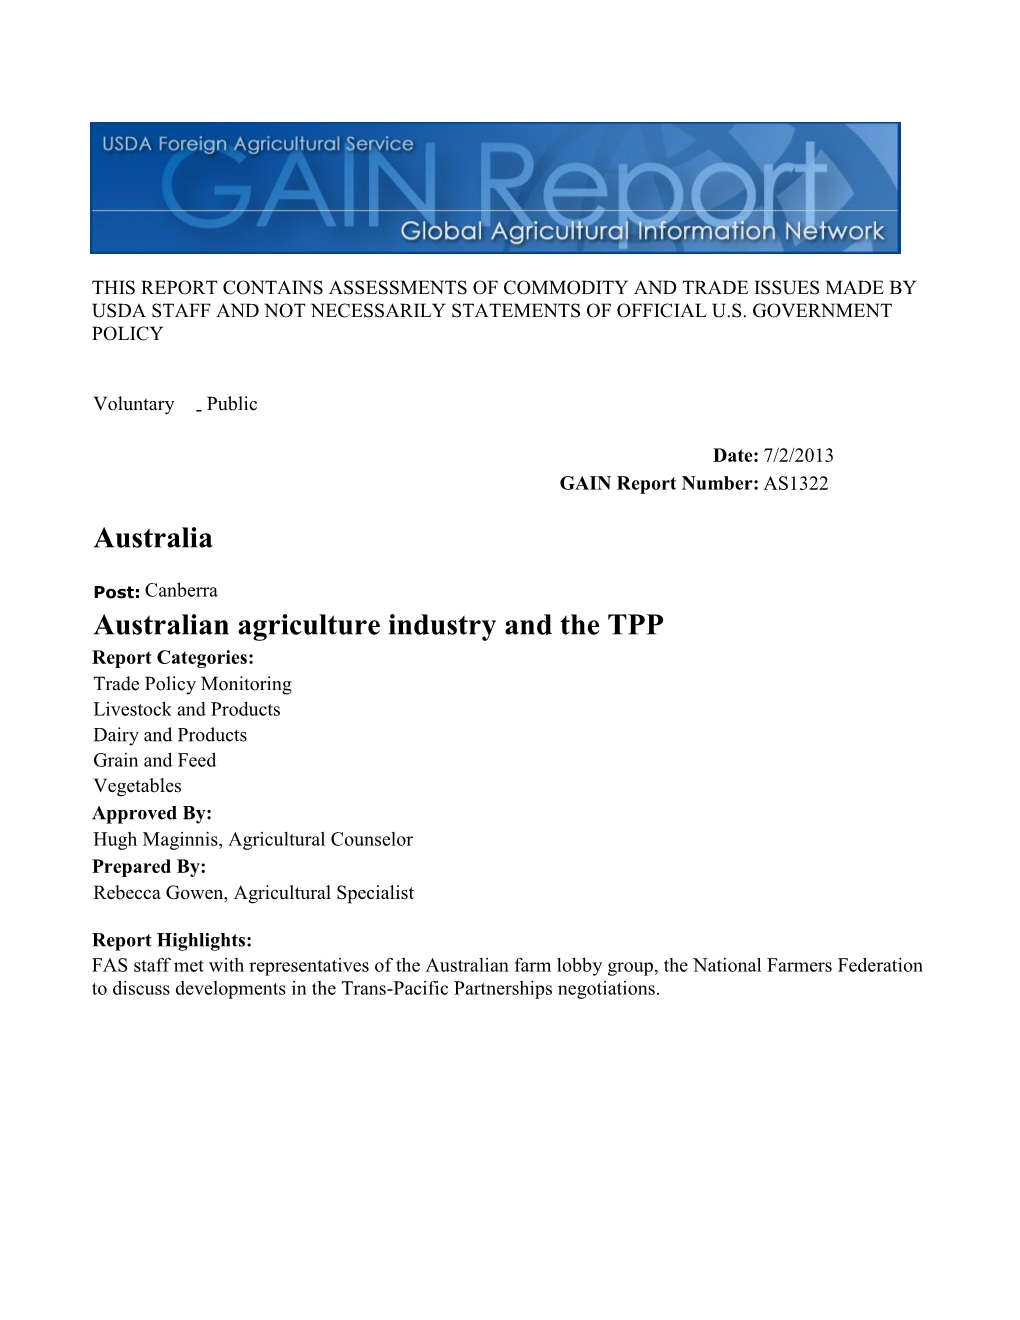 Australian Agriculture Industry and the TPP Australia